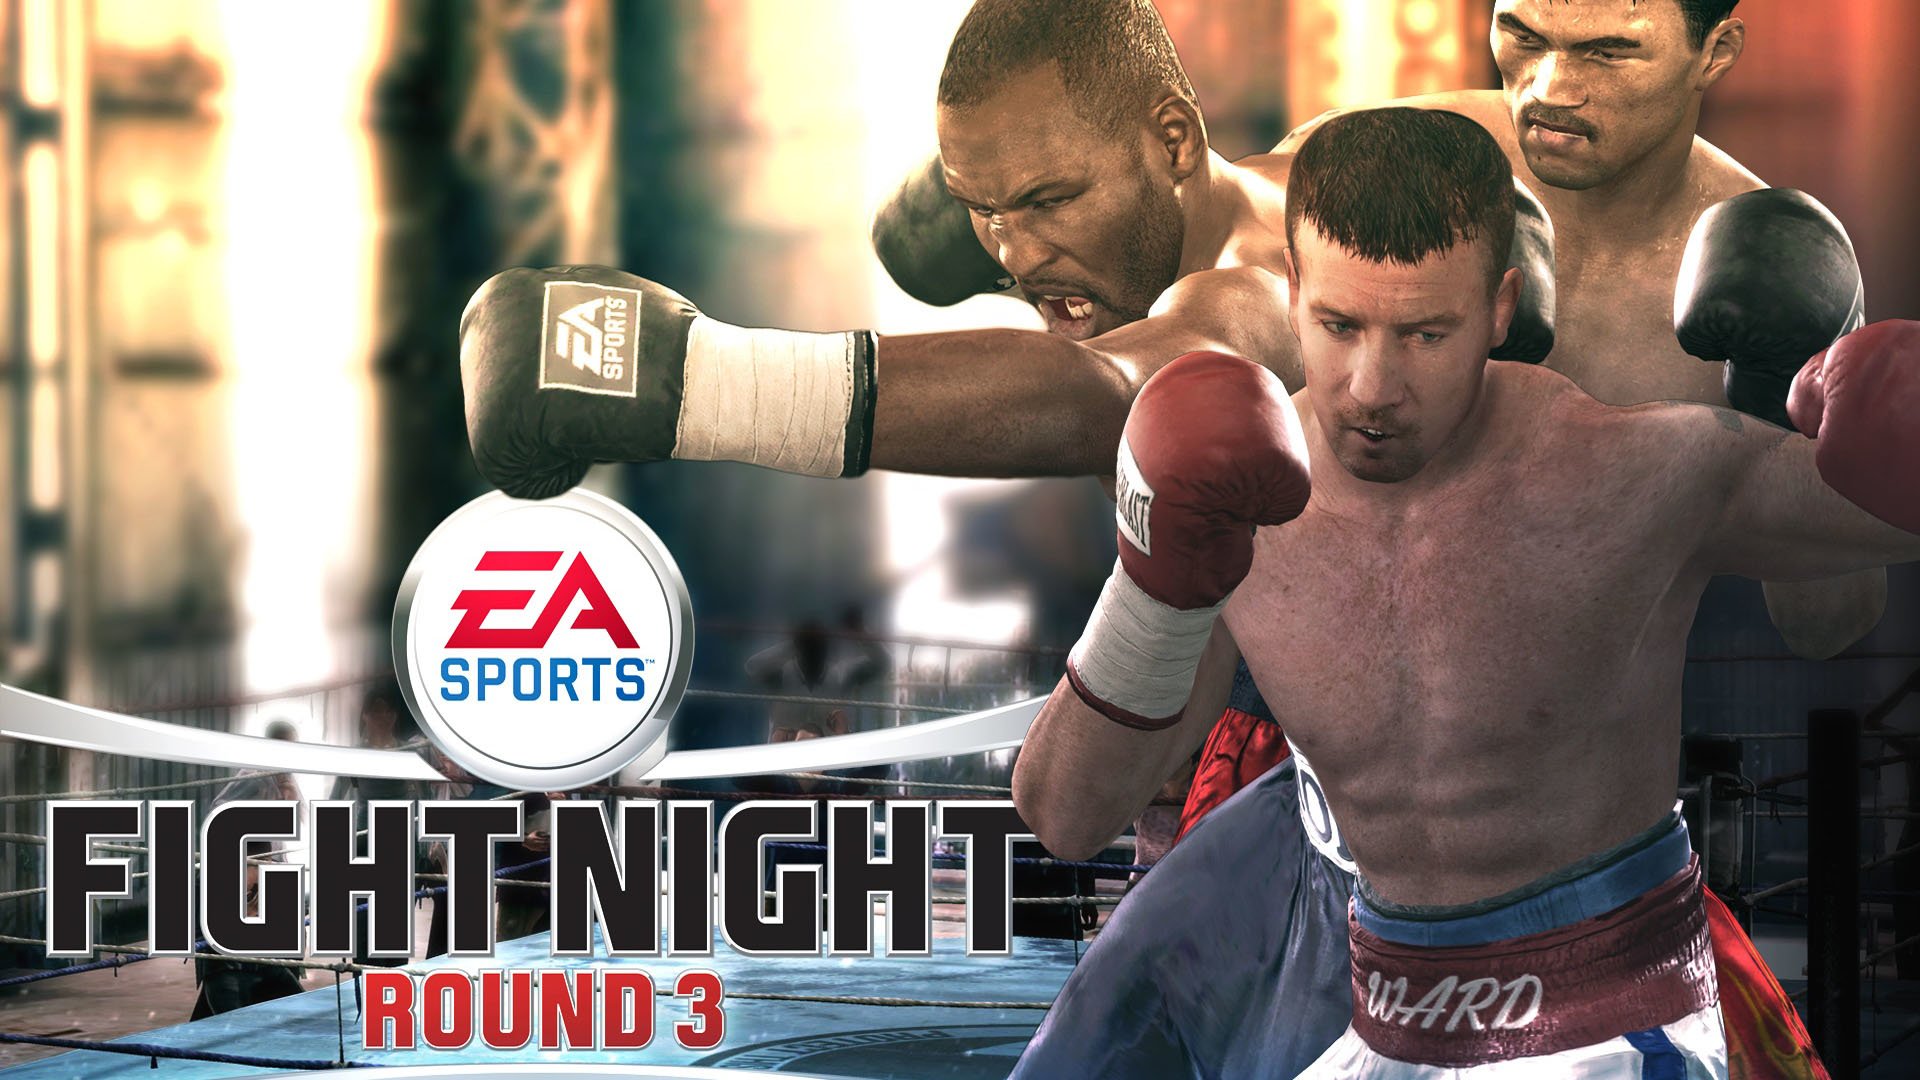 Fight night round 3 free download for ppsspp games